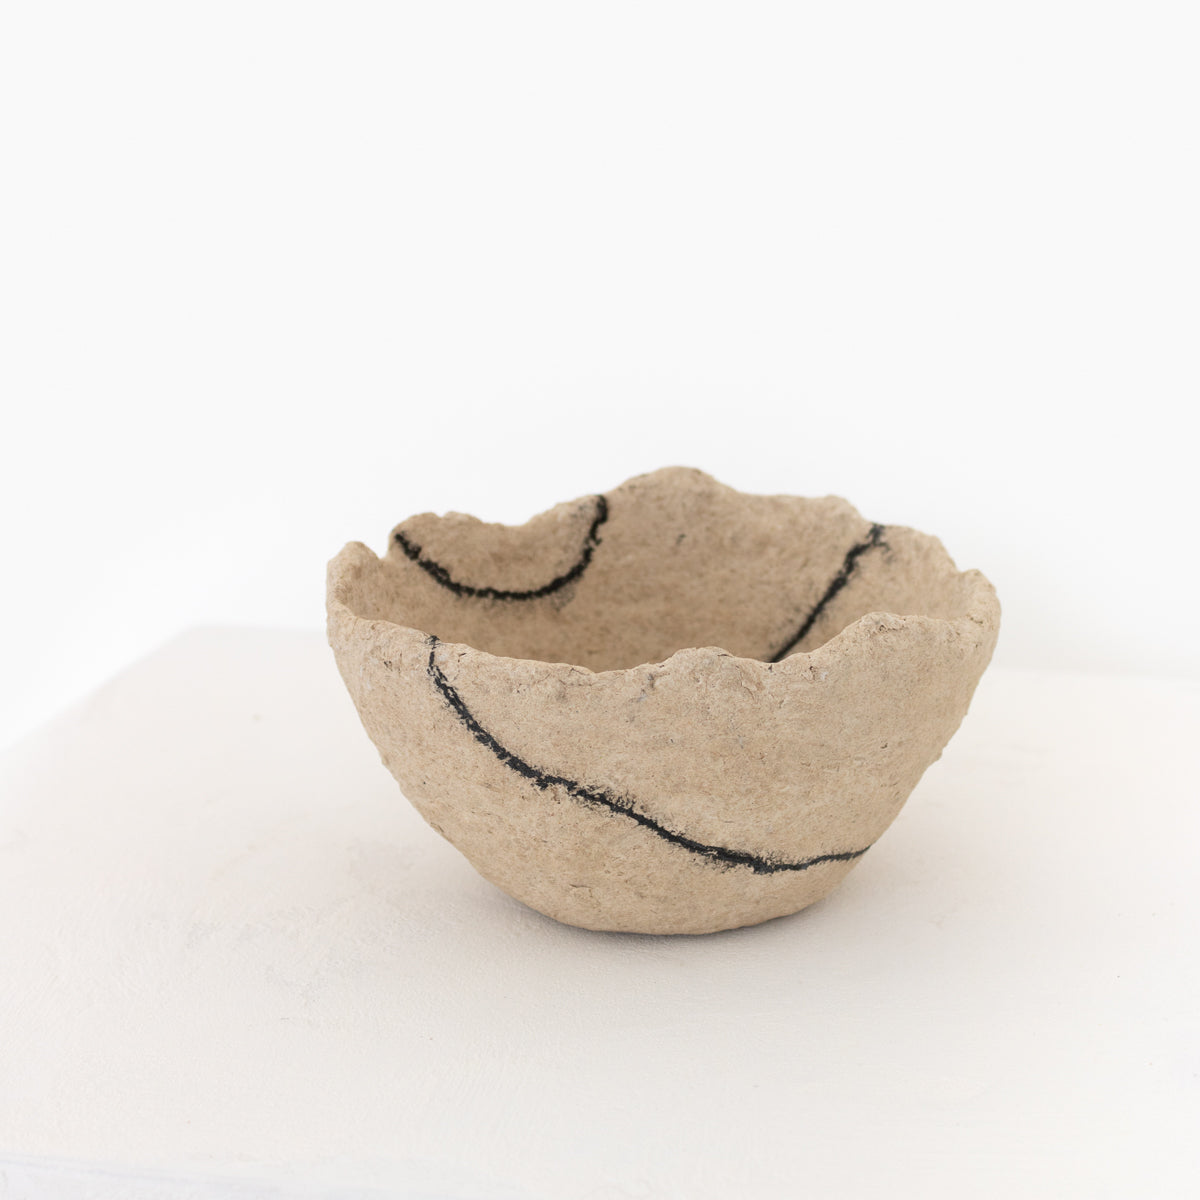 Handmade by Montana artist Jennifer Alden Design, Vessel Study No. 46 is a contemporary sculpture made from paper clay and charcoal. Each unique vessel in this collection is one-of-a-kind, rare, and both primitive and modern. Angle number 3